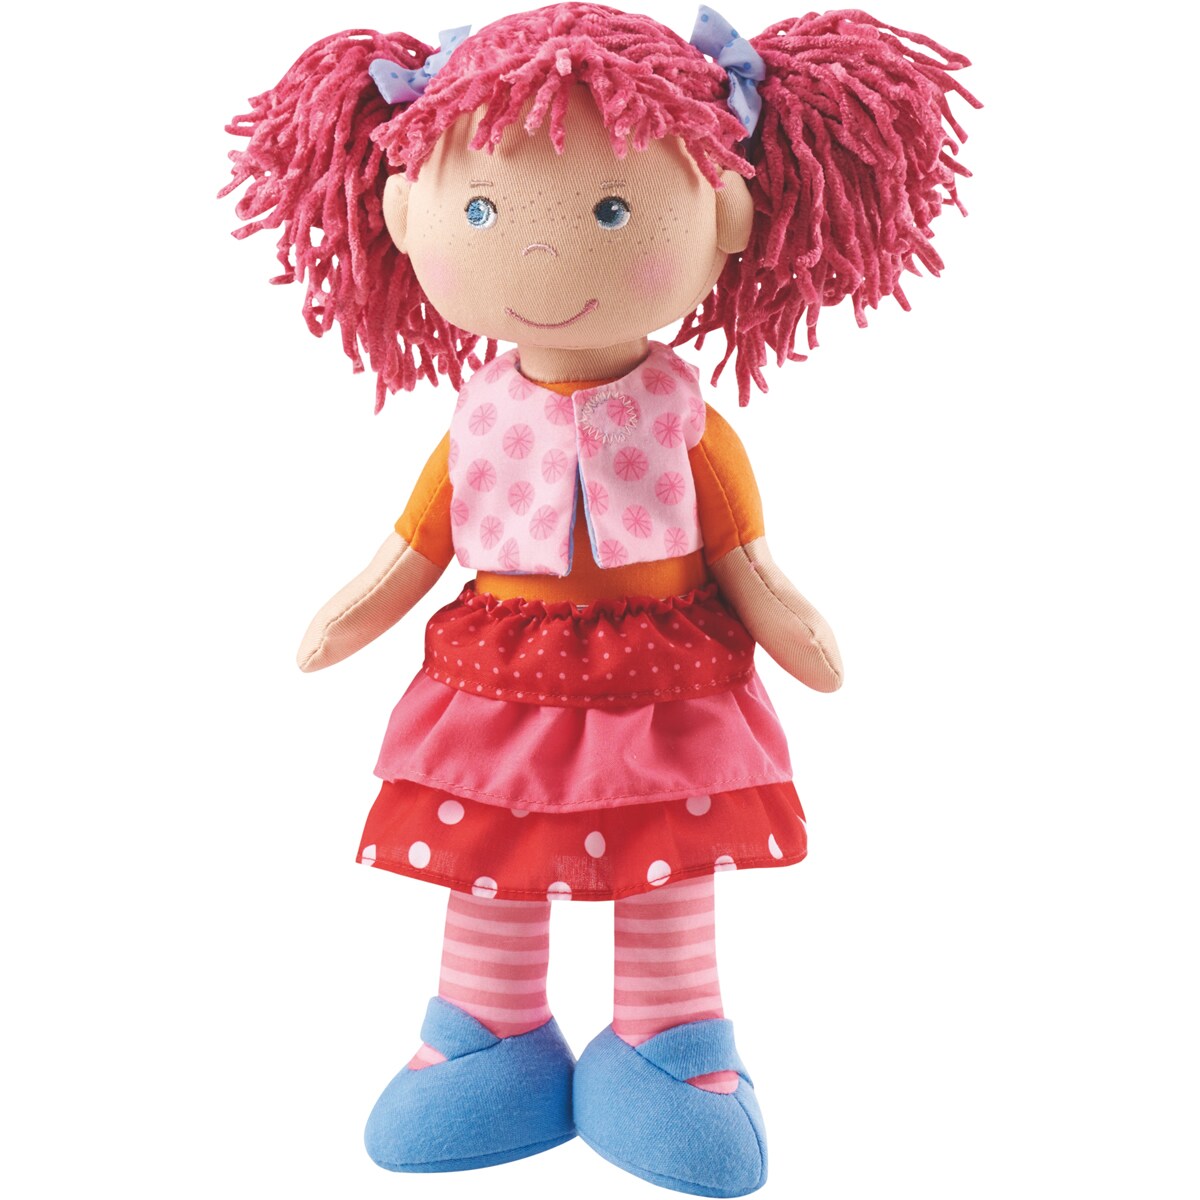 HABA Lilli-Lou 12&#x22; Soft Doll with Pink Hair in Pigtails, Blue Eyes and Embroidered Face for Ages 18 Months and Up